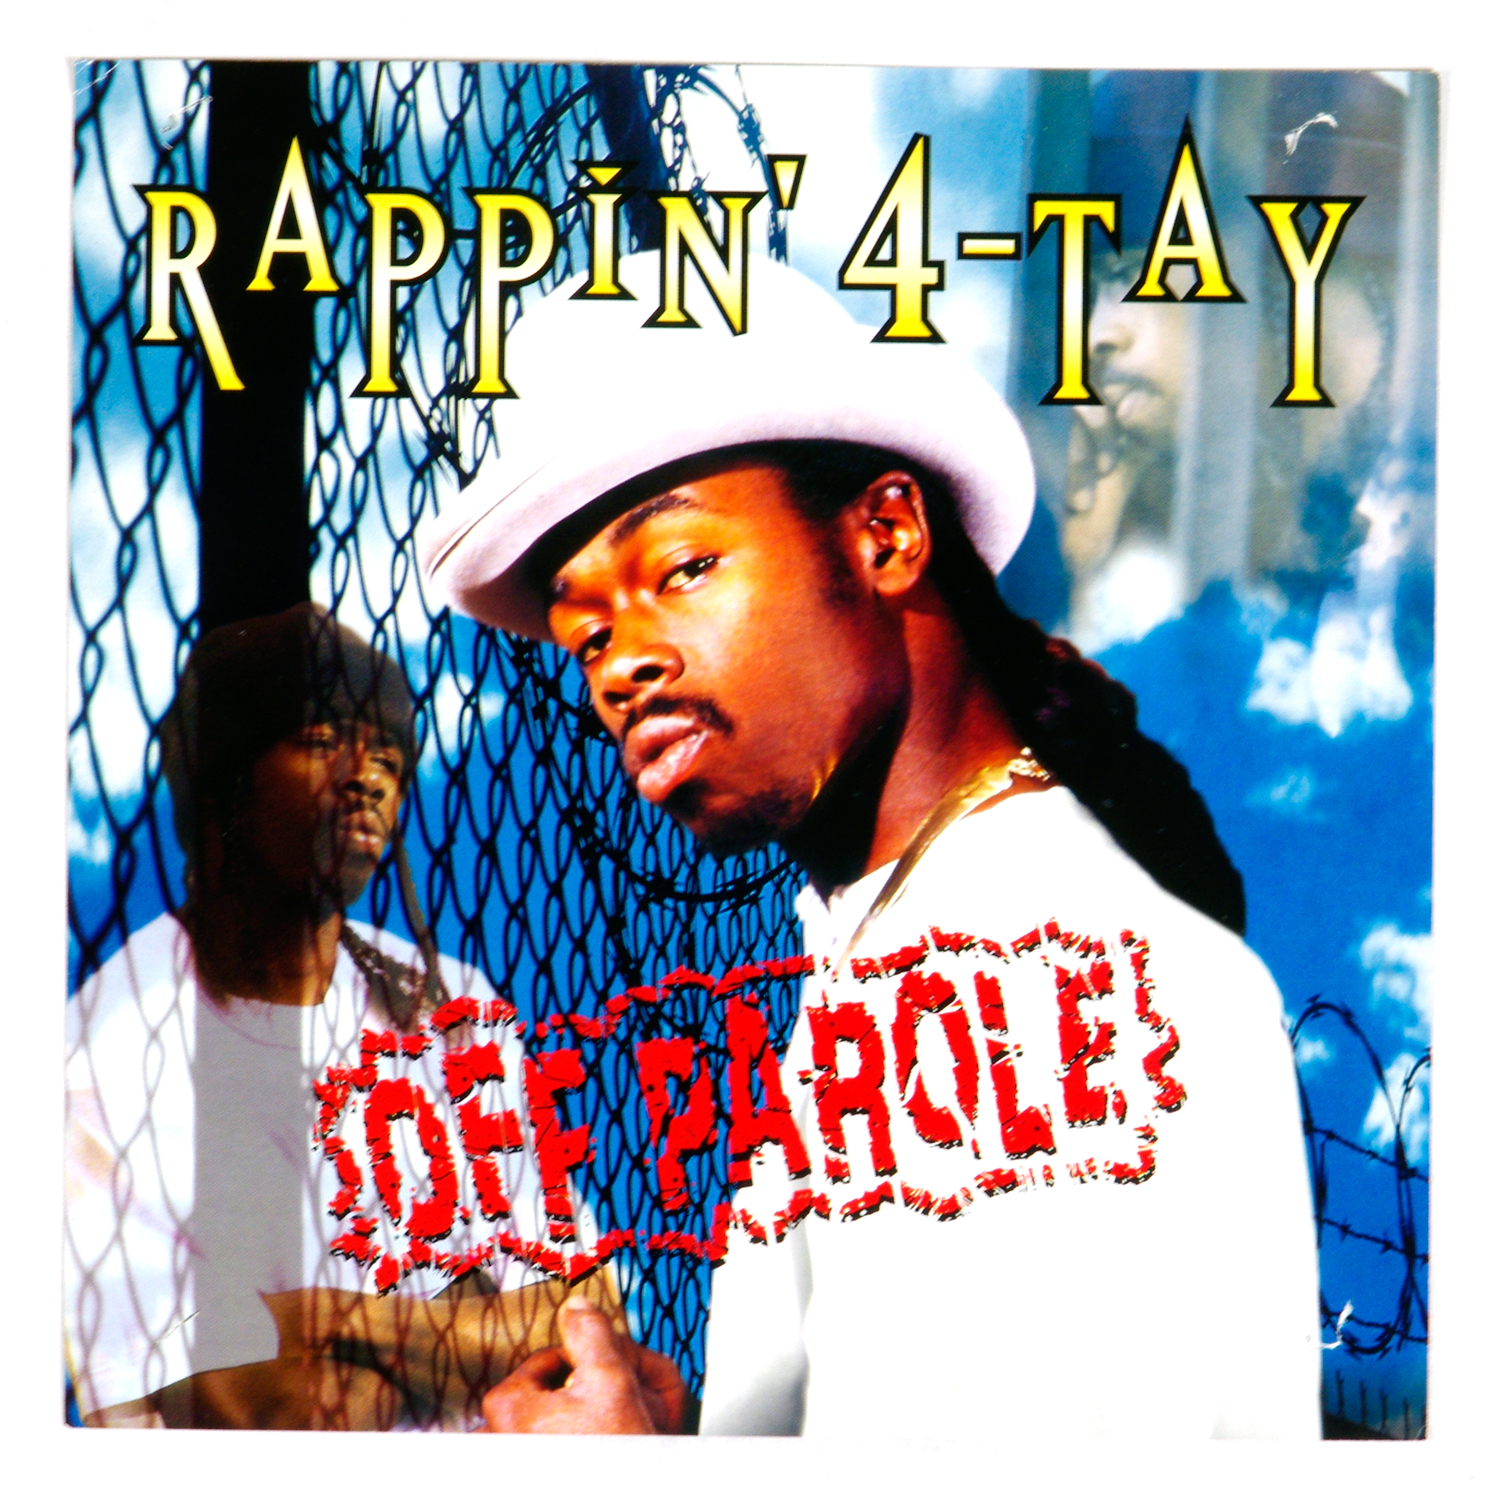 Rappin' 4-Tay Poster Flat 1996 Off Parole Album Promotion 12 x 12